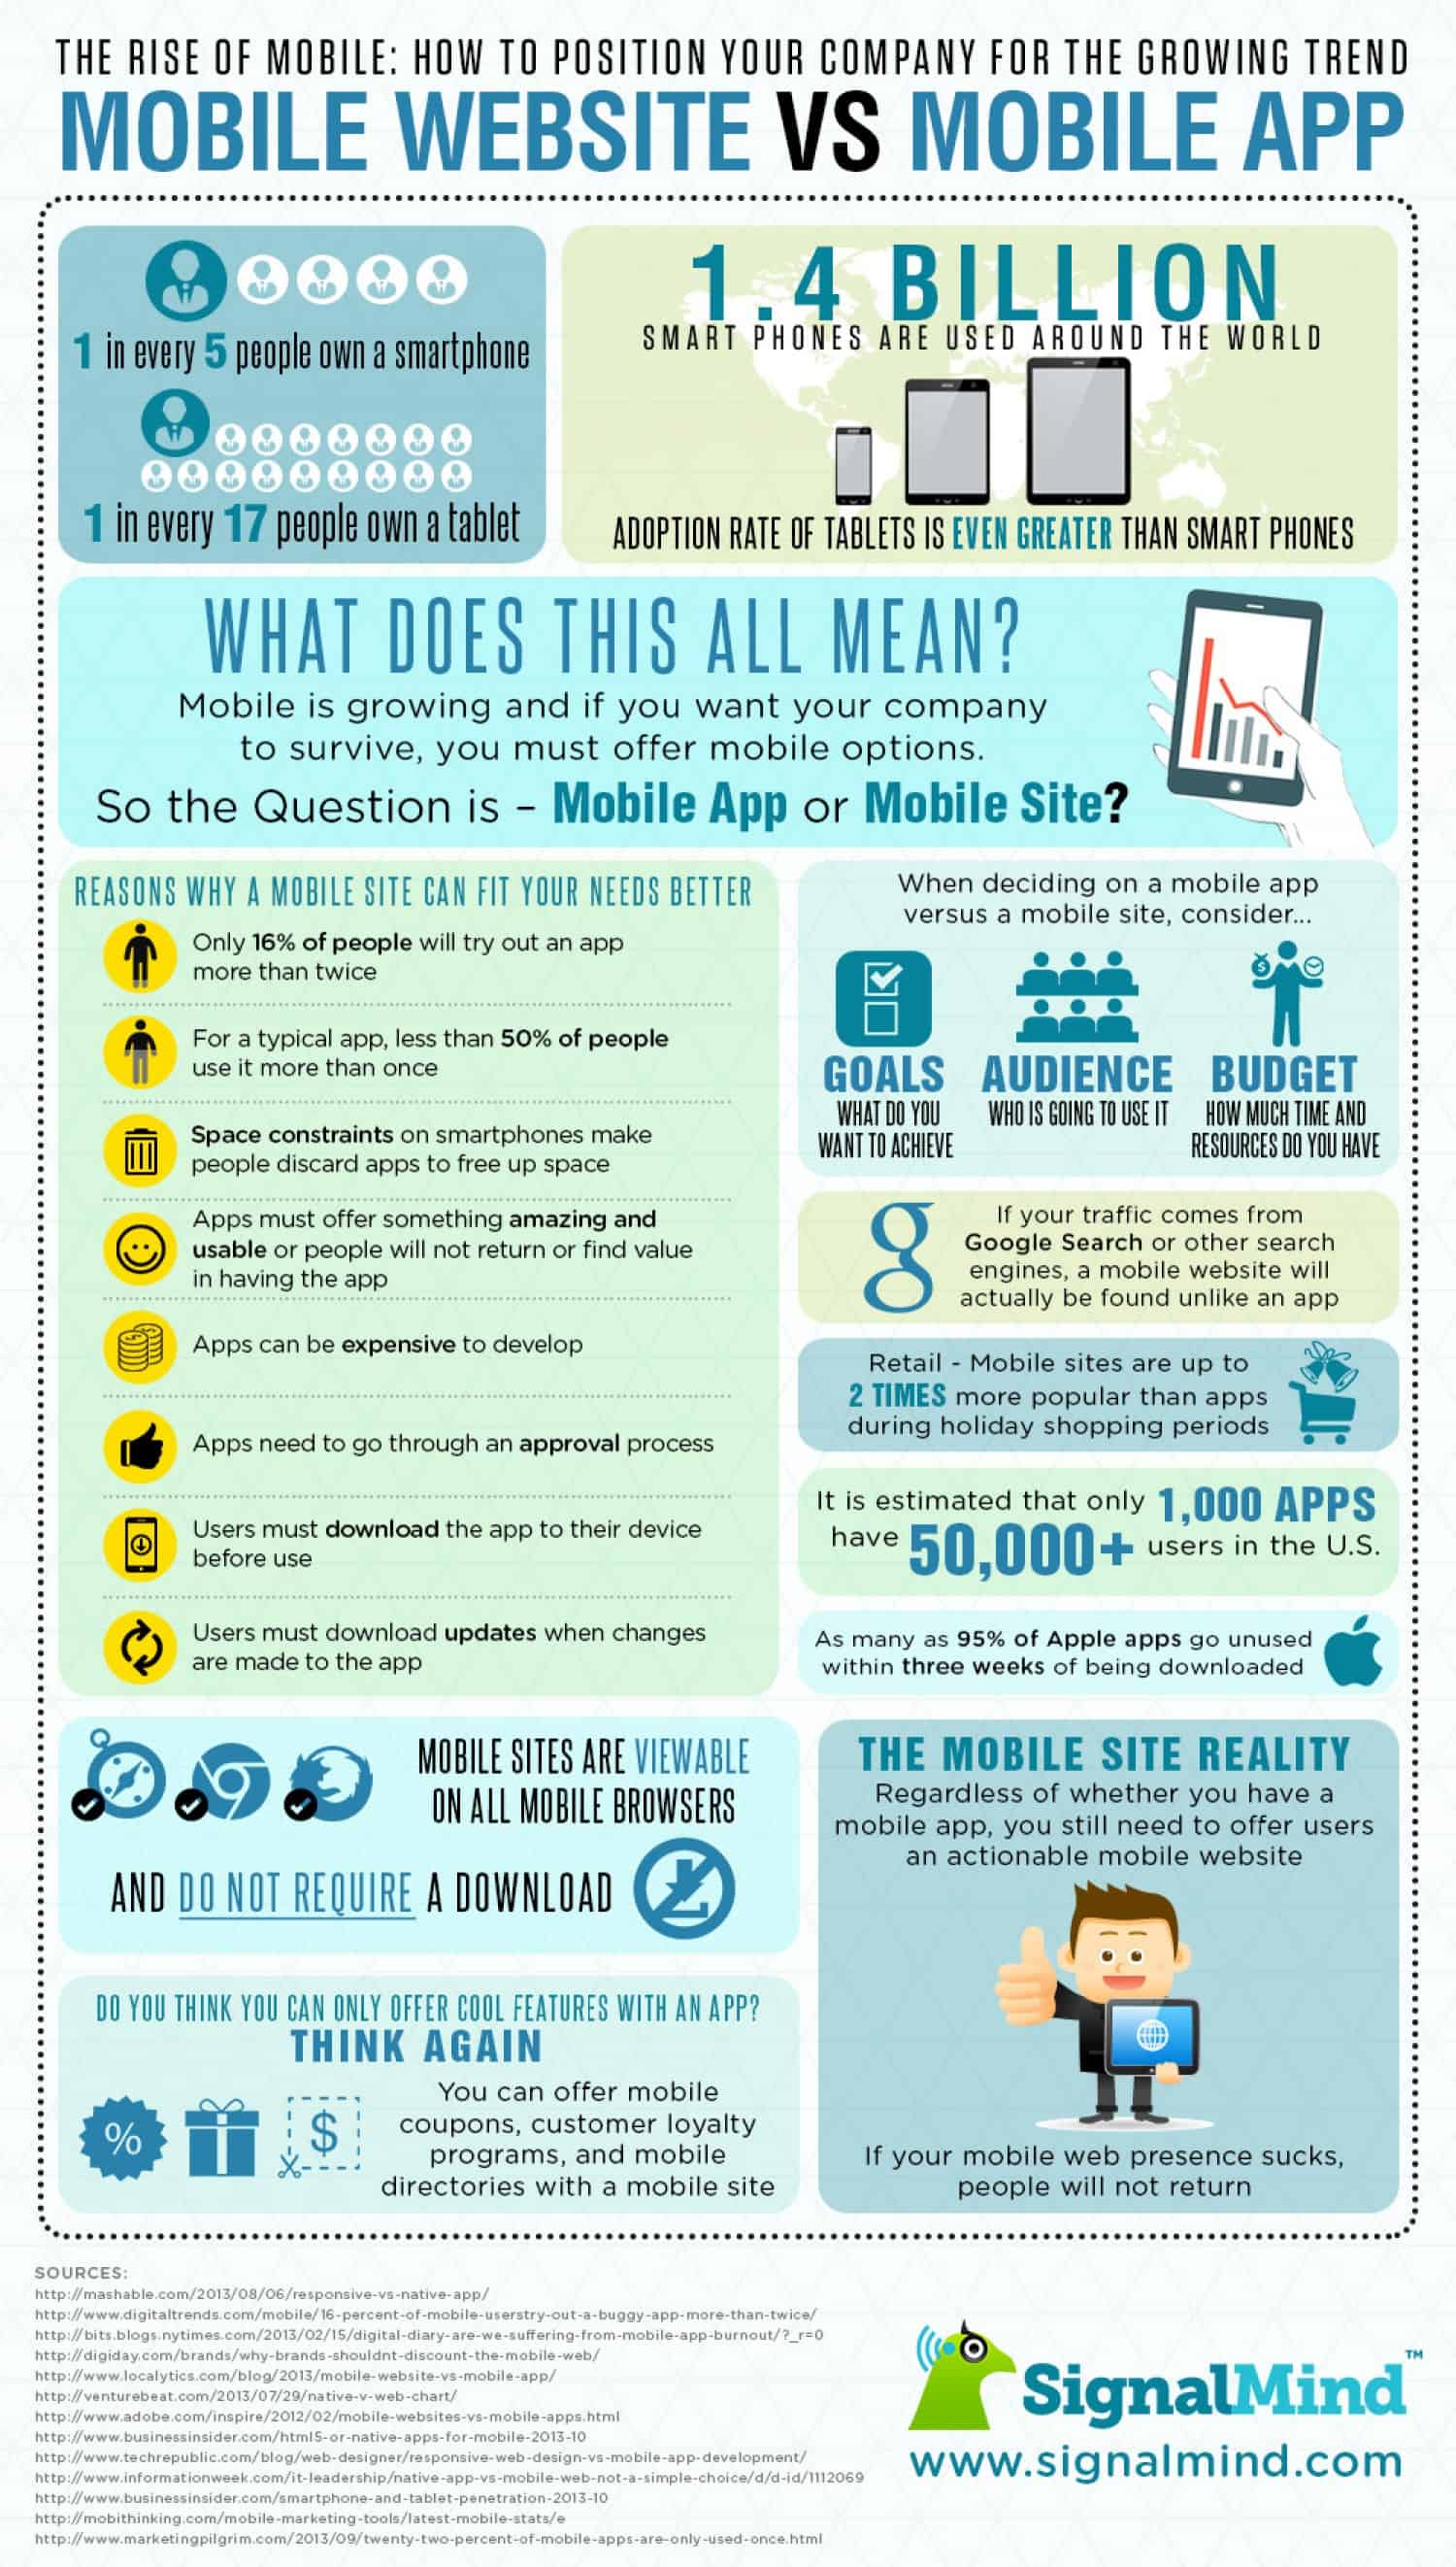 Mobile site or mobile app? // by Connected